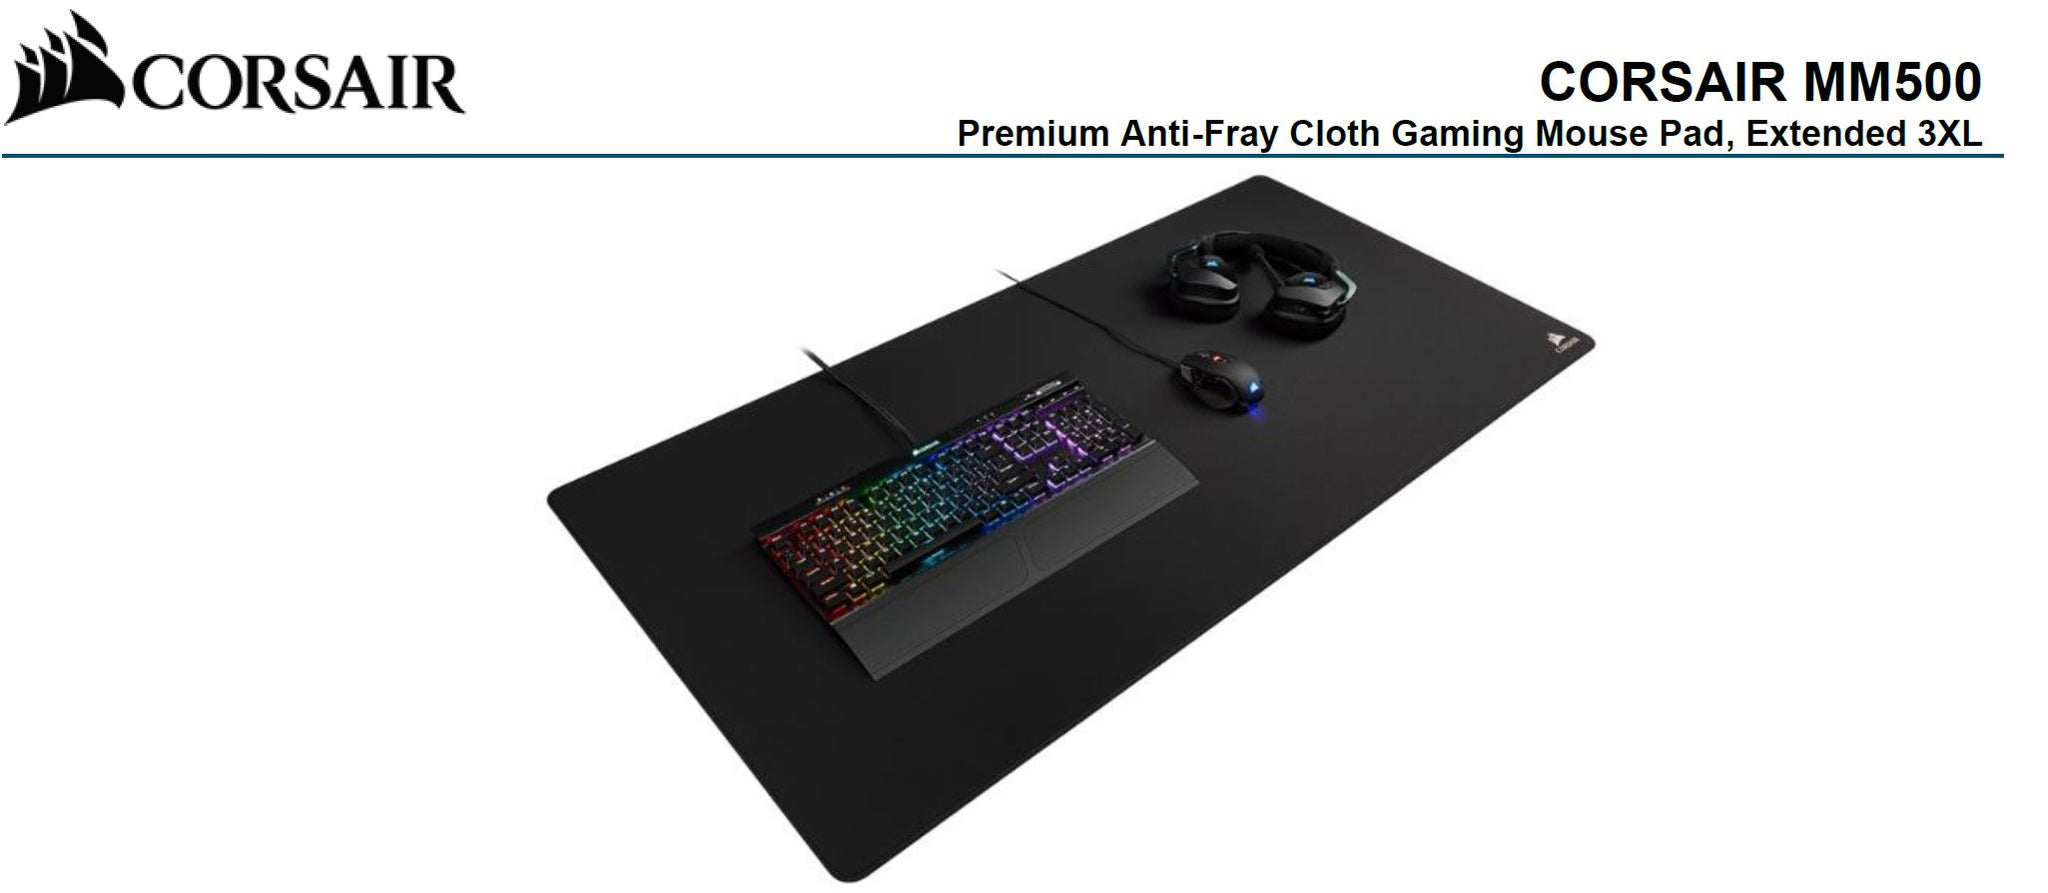 Corsair MM500 Extended 3XL Anti-Fray and Comfort Gaming, 1220mm x 610mm x 3mm GAMING MOUSE MAT (LS) Corsair